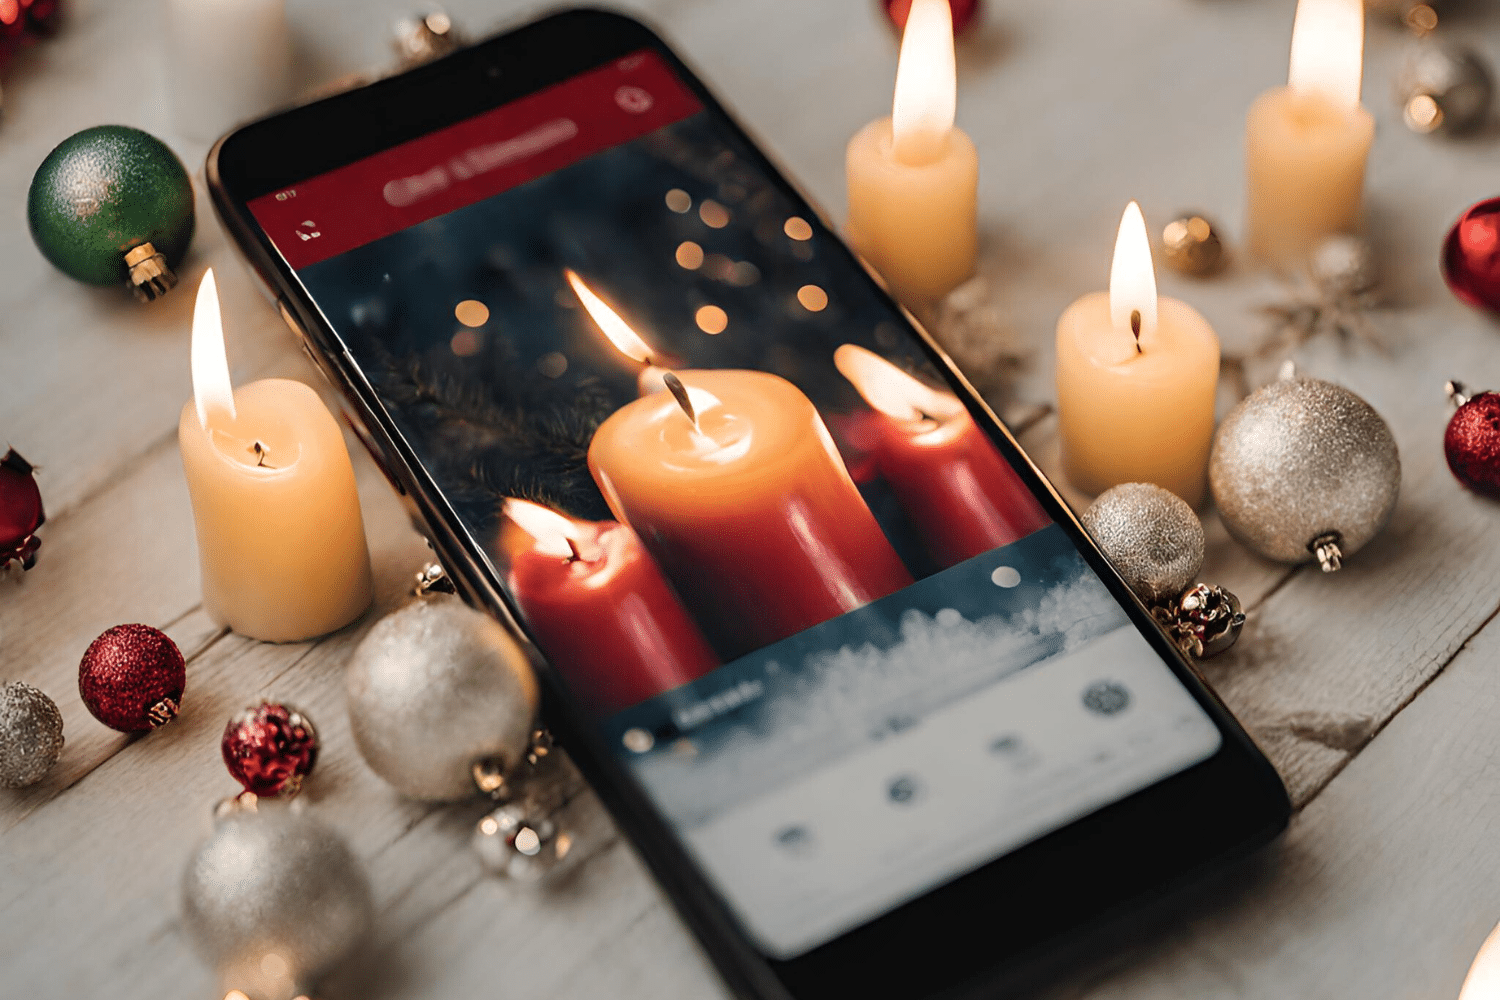 A cellphone with a playlist in a Christmas setting